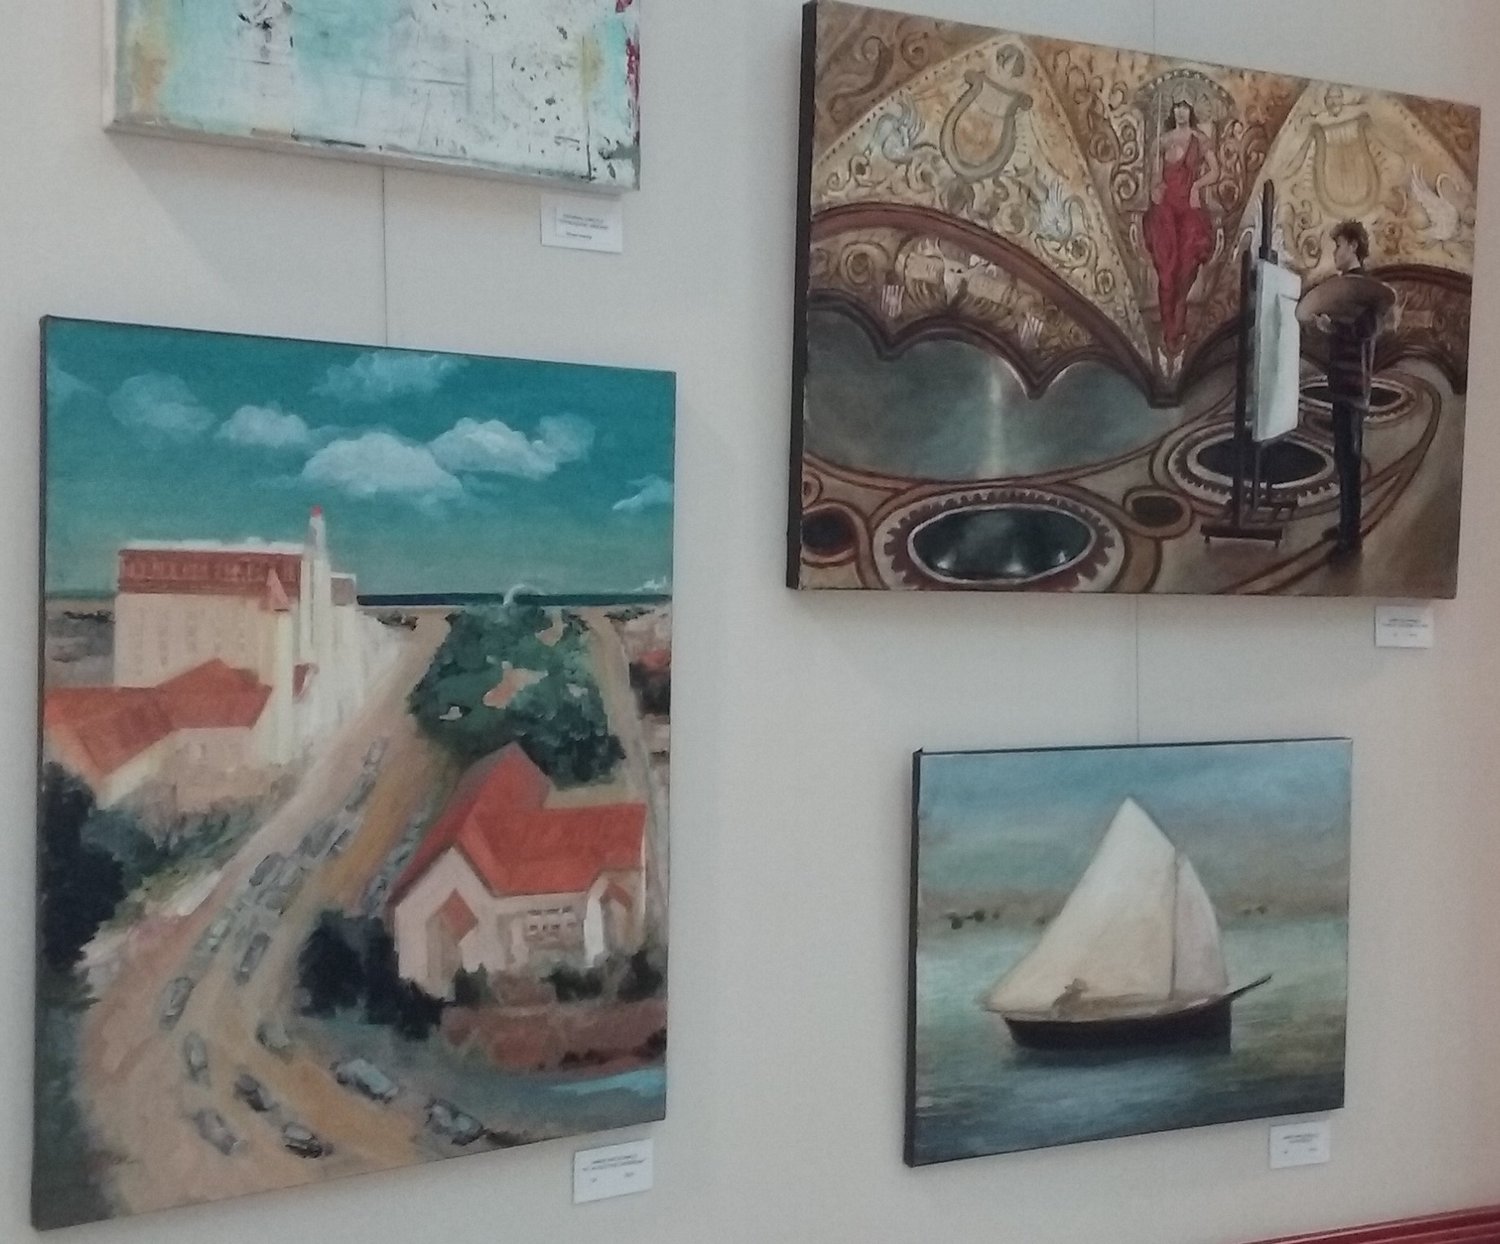 Several works of art are seen on one wall.